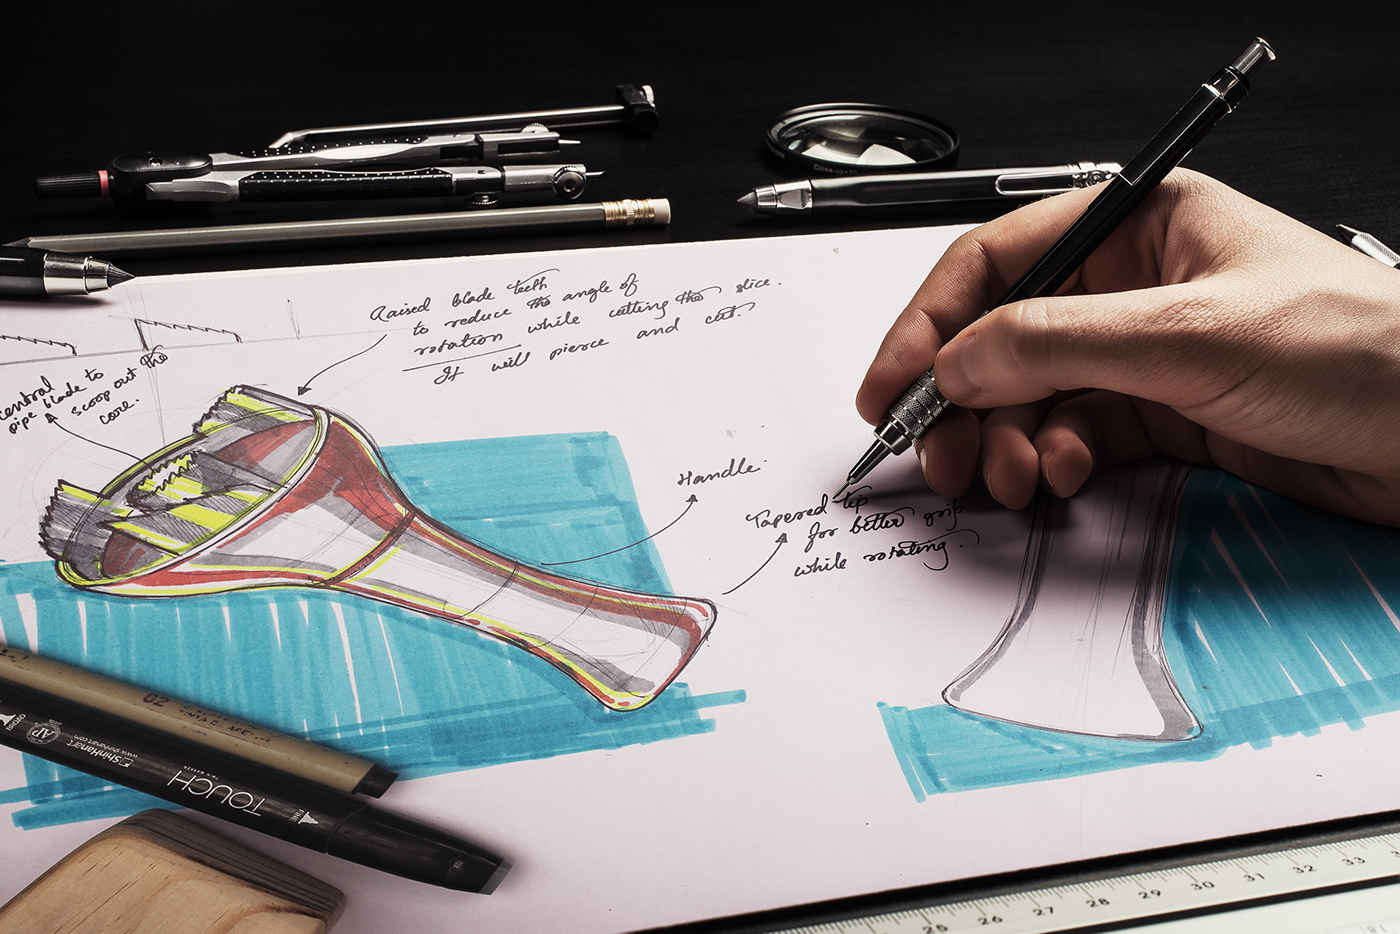 anshuman kumar nid NID national institute of design FLX decathlon shoes sketches illustrations ideations